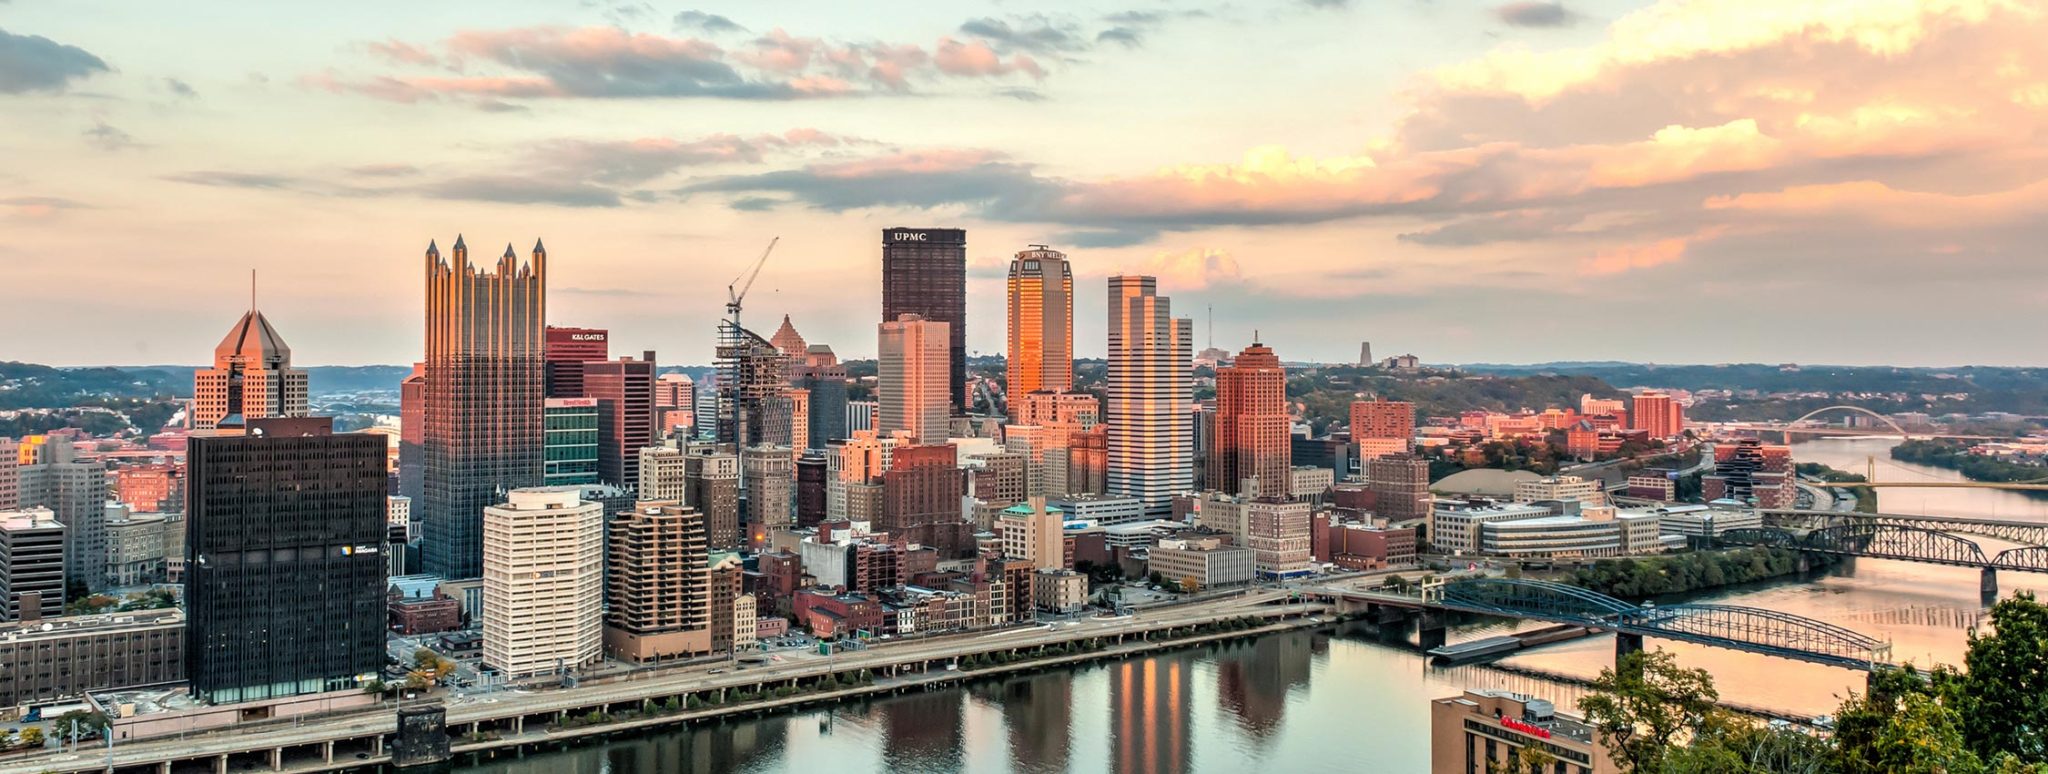 How to See the Best of Pittsburgh on a Budget